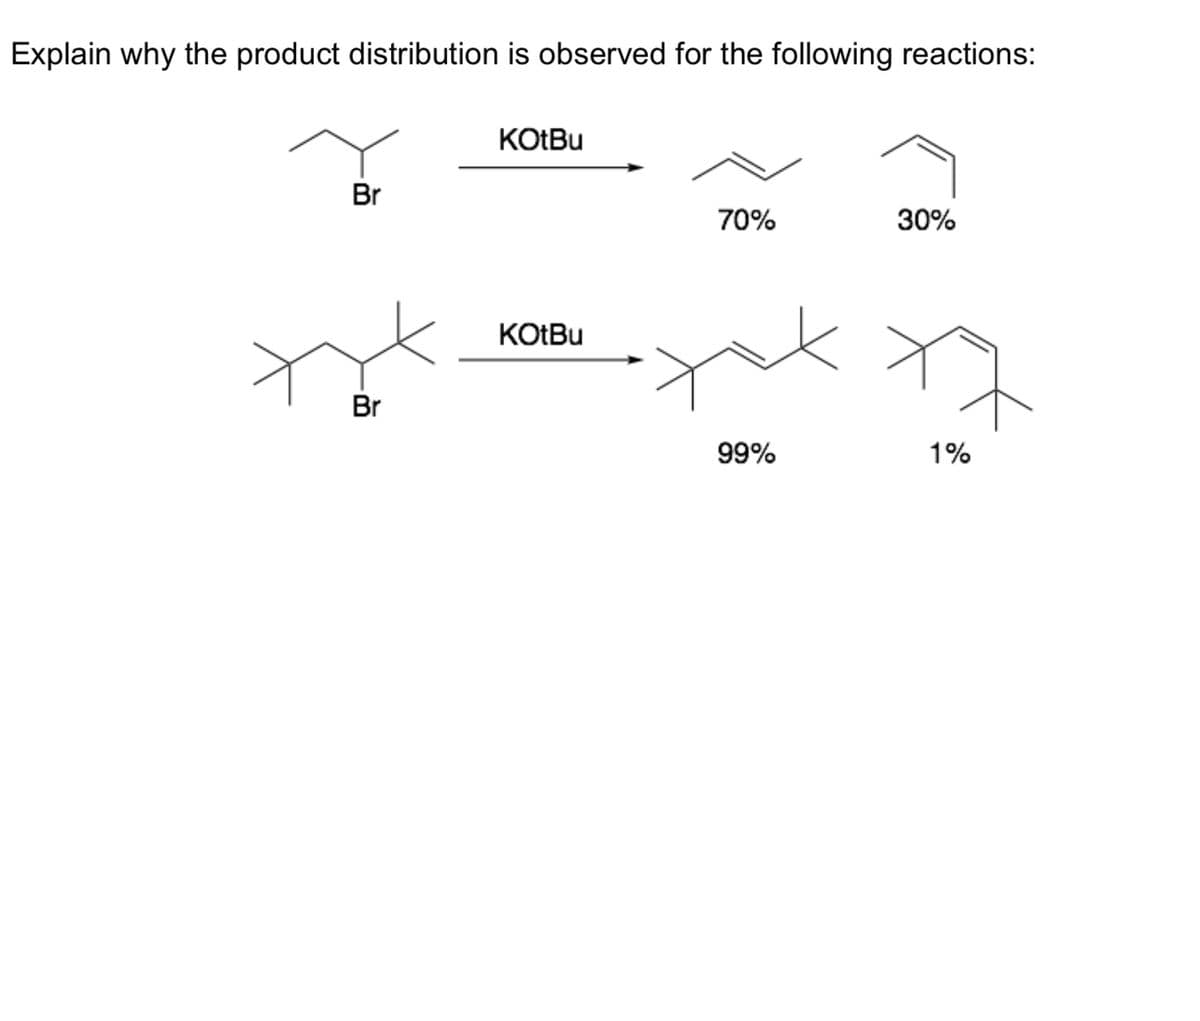 Explain why the product distribution is observed for the following reactions:
Br
Br
KOtBu
KOtBu
70%
99%
30%
1%